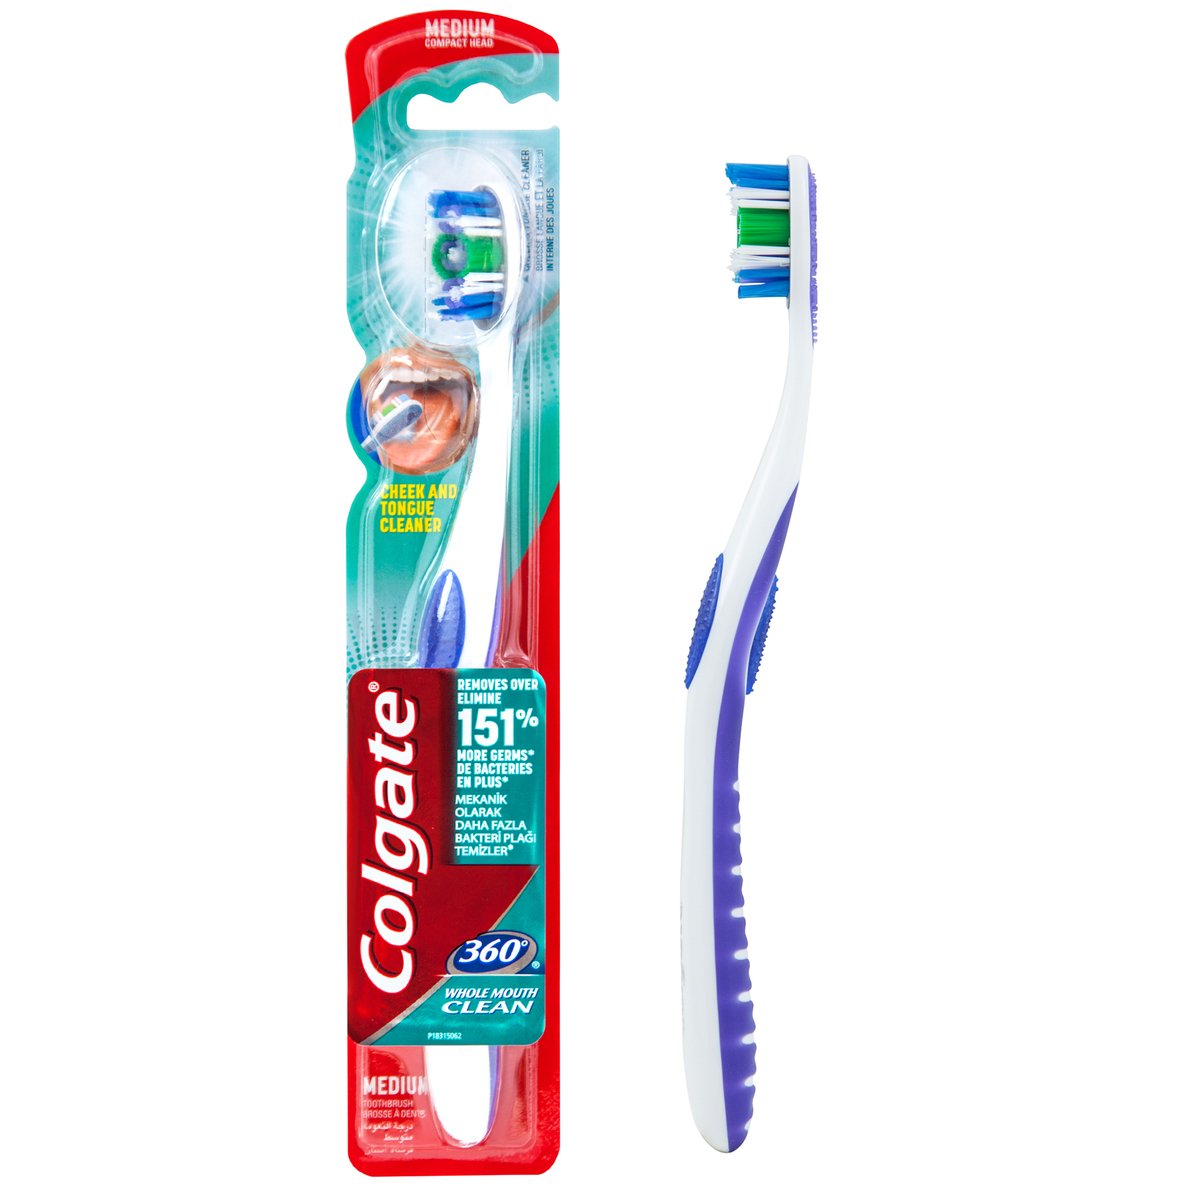 Colgate Toothbrush 360 Whole Mouth Clean Medium 1 pc